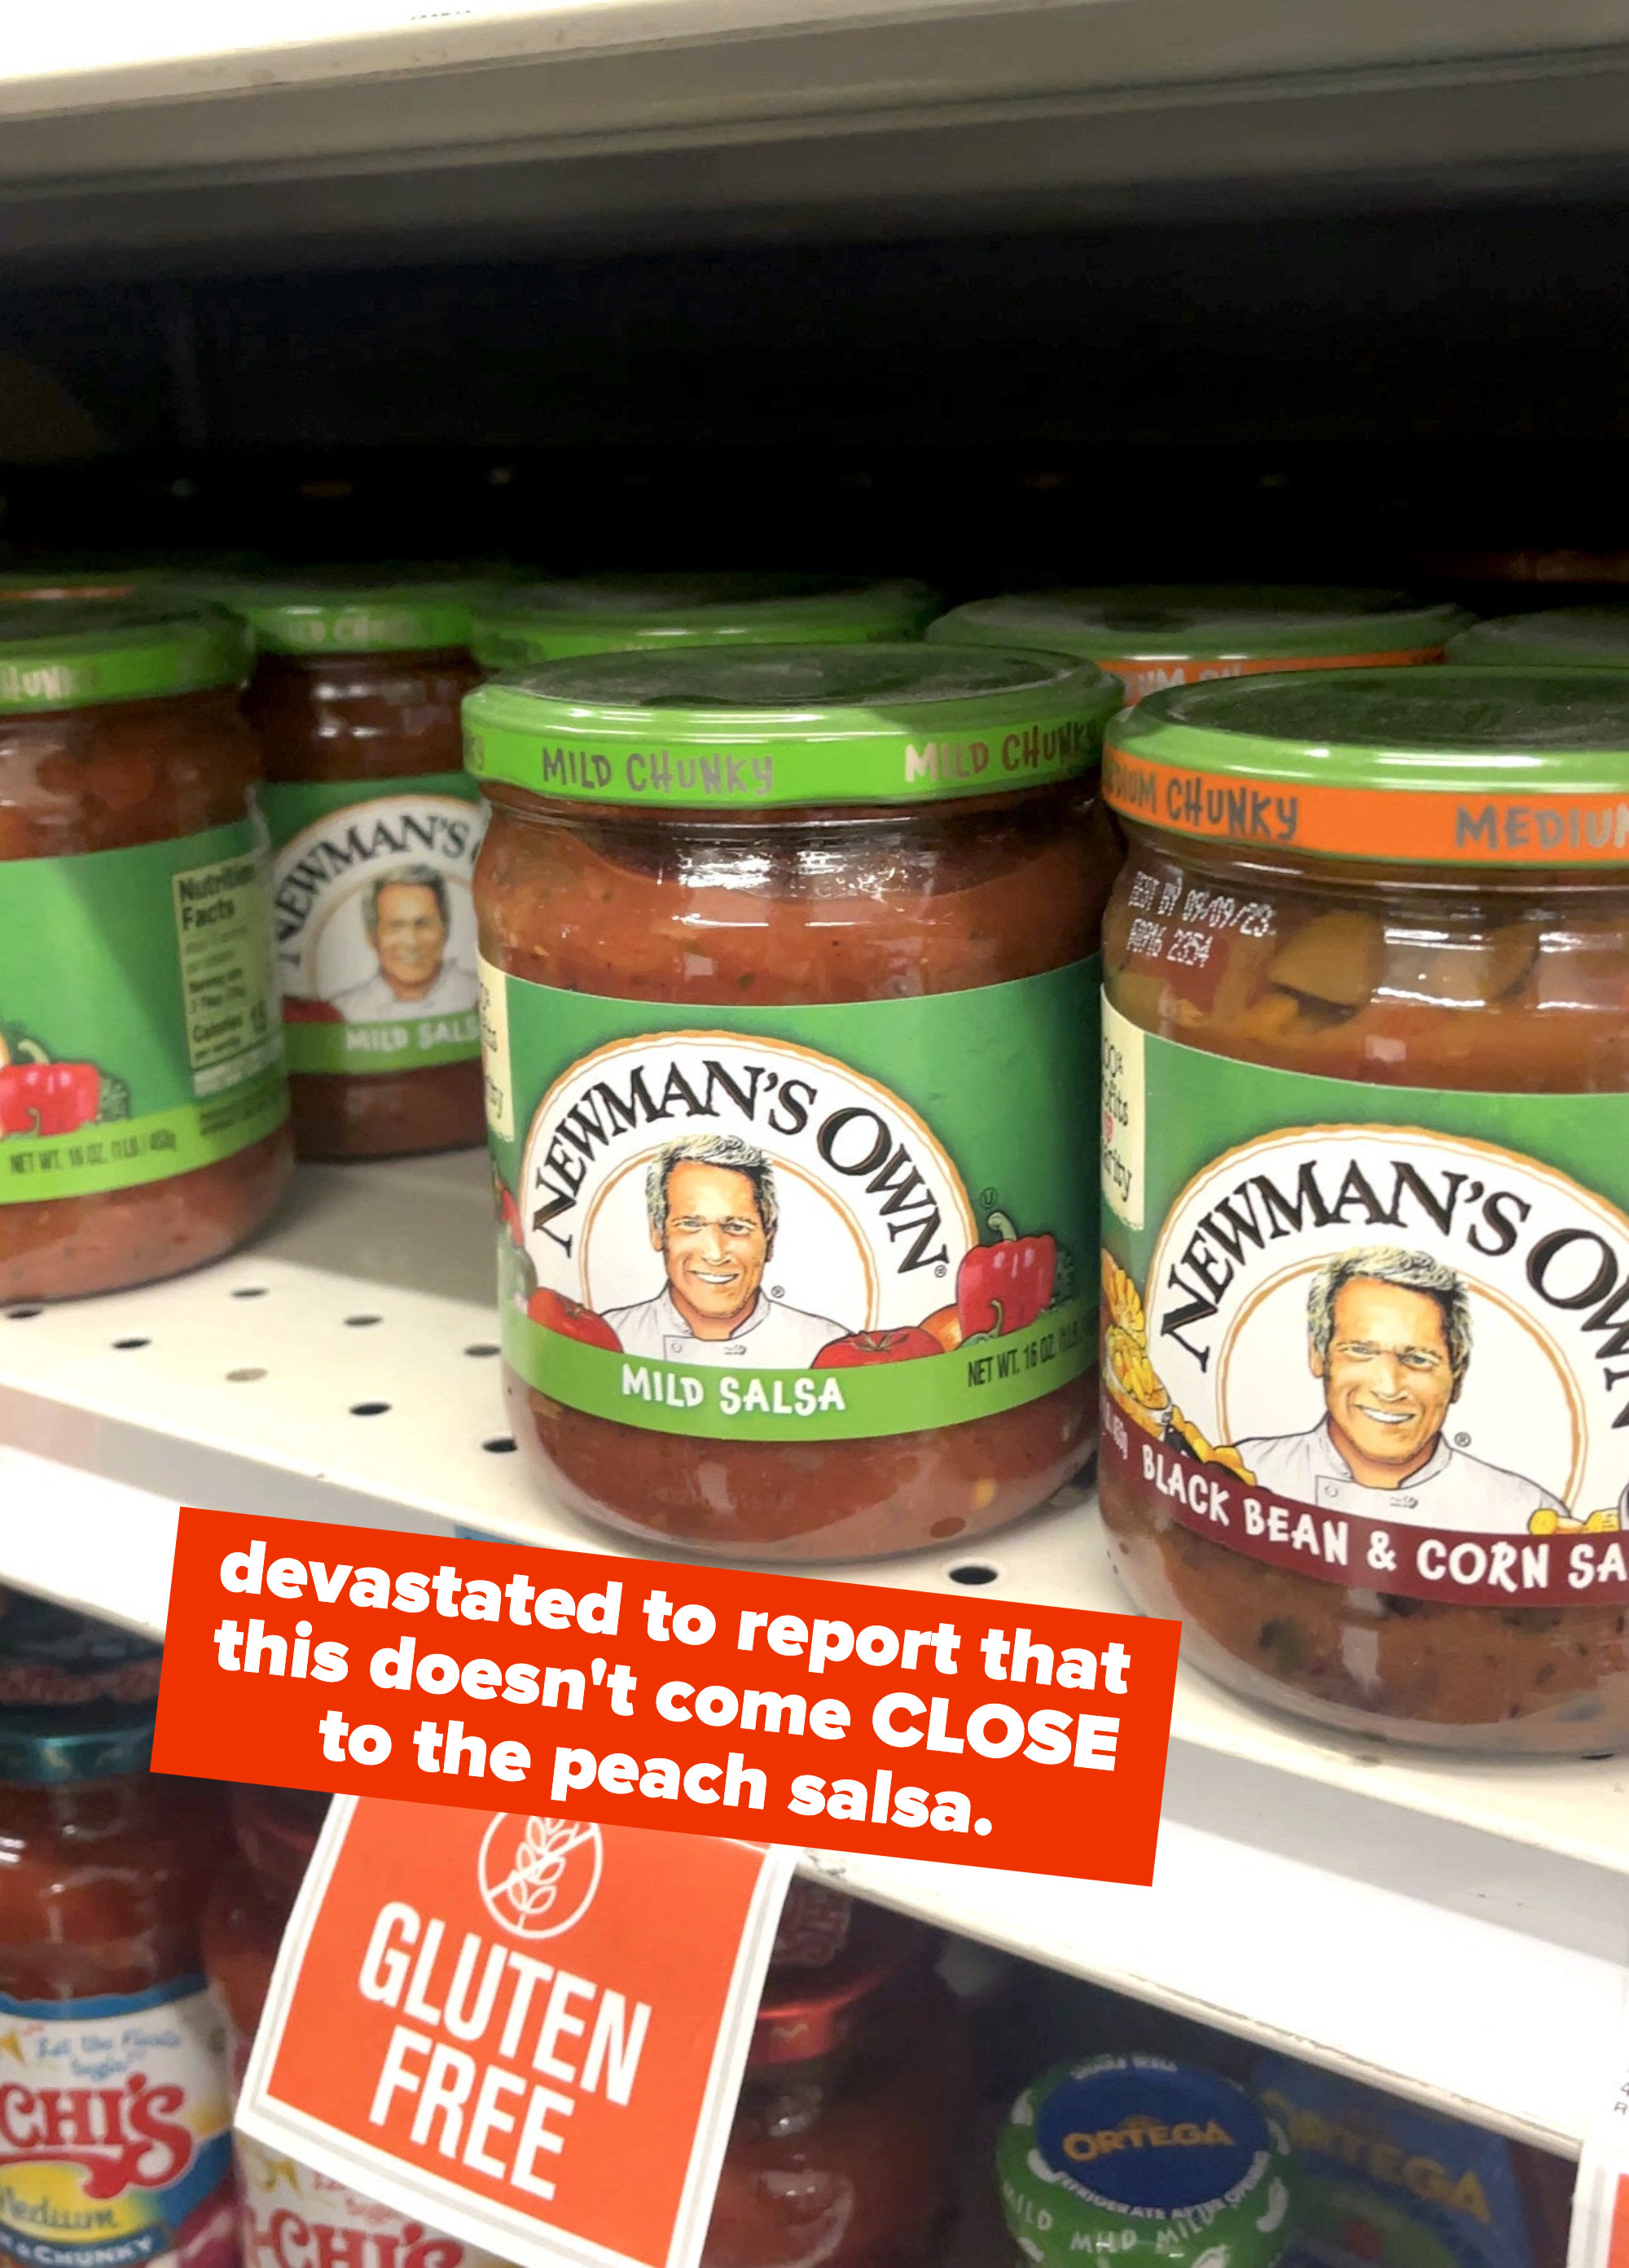 An image of Newman&#x27;s Own mild salsa with a caption that says &quot;devastated to report this doesn&#x27;t come close to the peach salsa&quot;